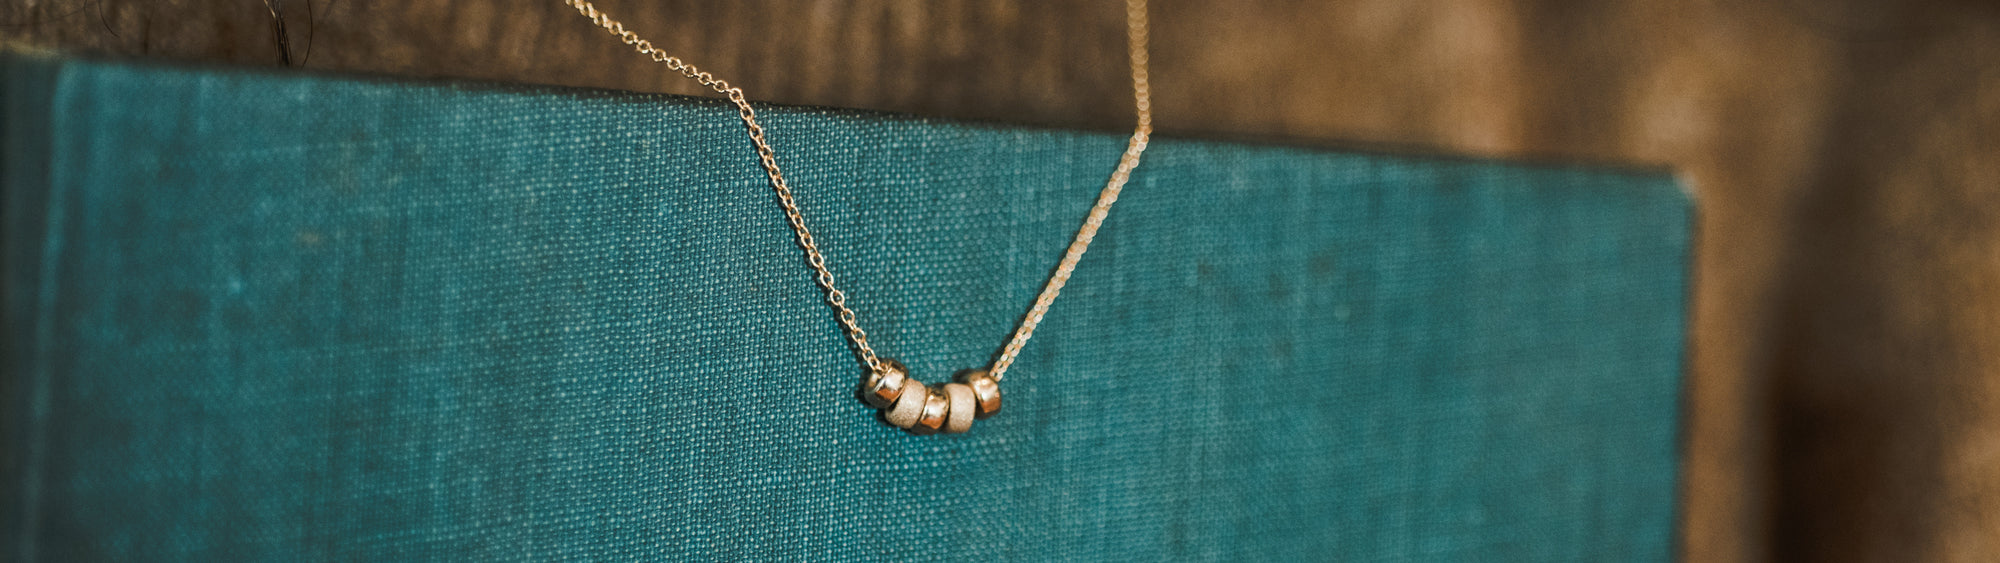 A delicate gold necklace with a pearl pendant hangs against a textured teal book cover.